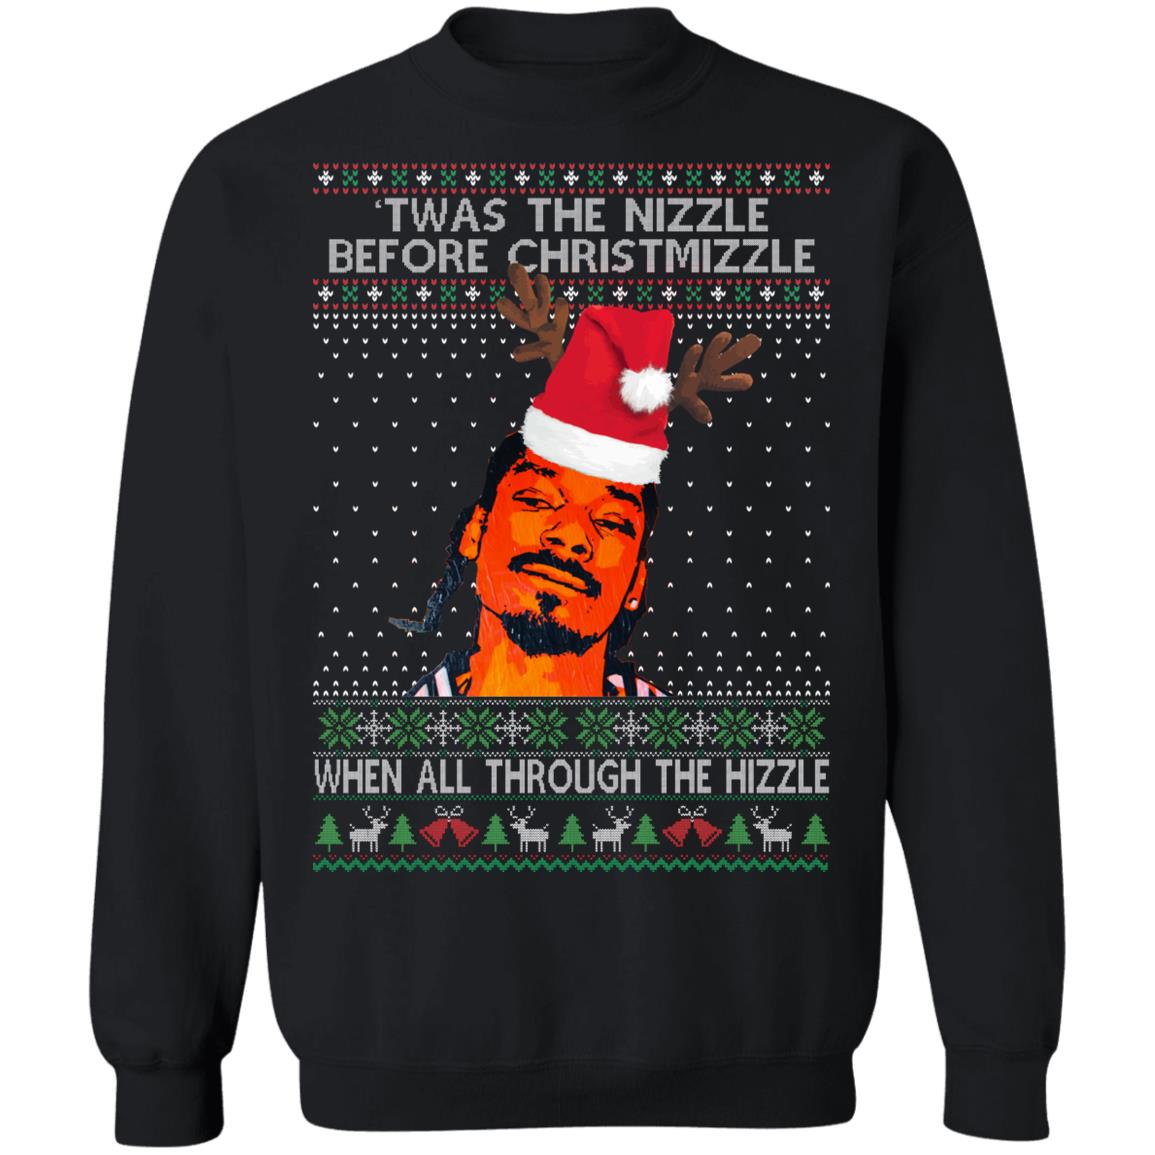 Snoop Dogg Twas the nizzle before Christmizzle when all through the ...